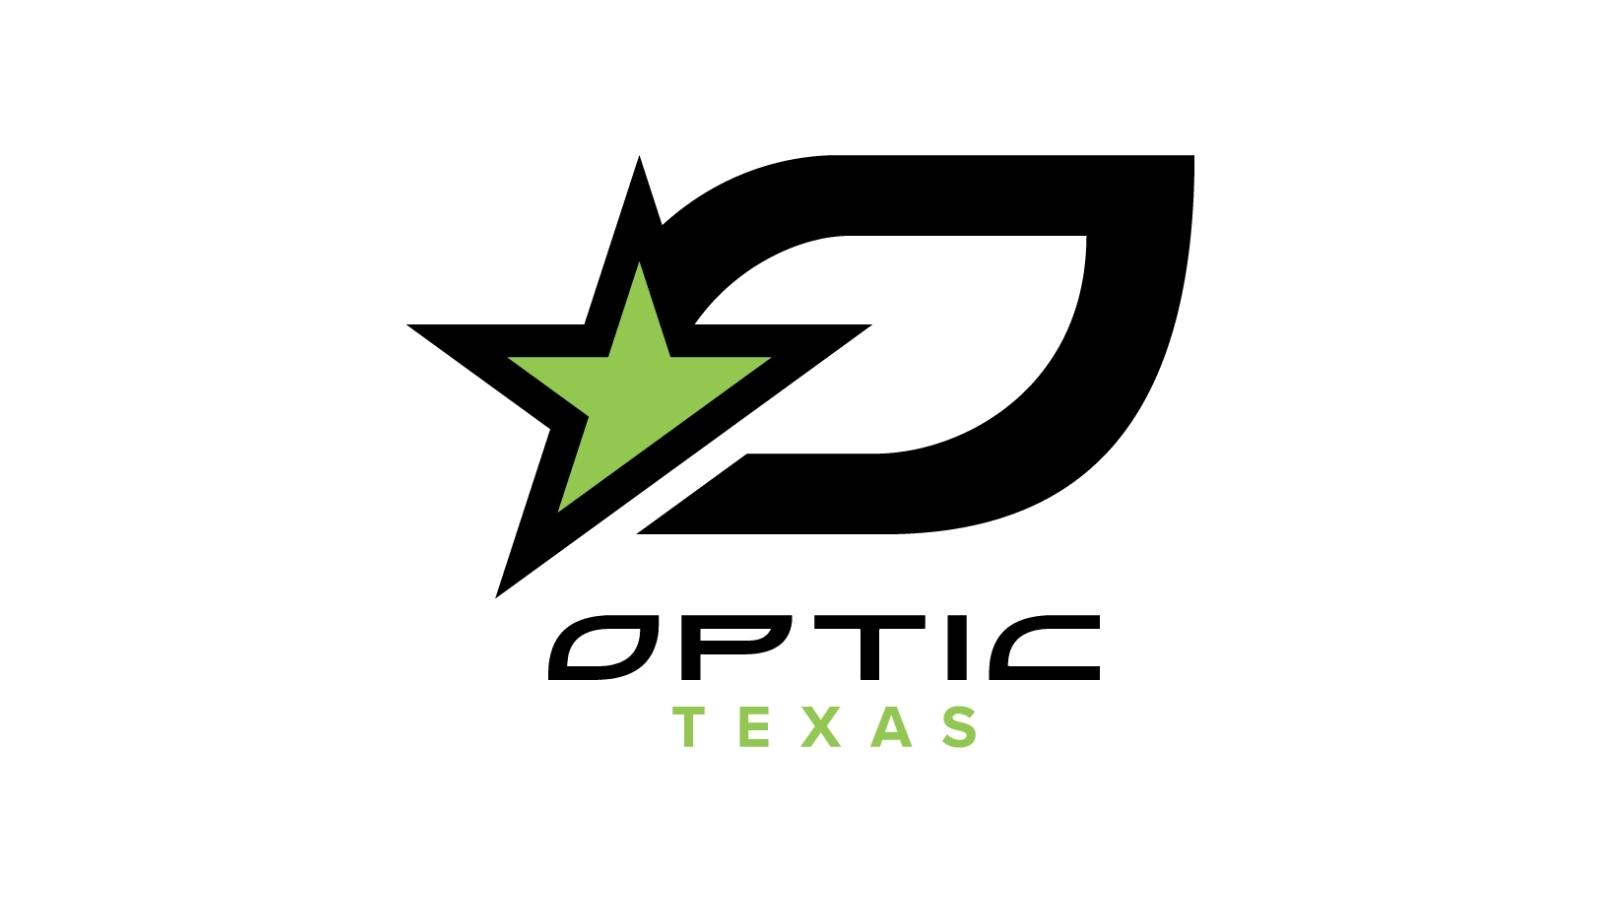 A new Empire: OpTic Texas is the new Call of Duty League team in North Texas